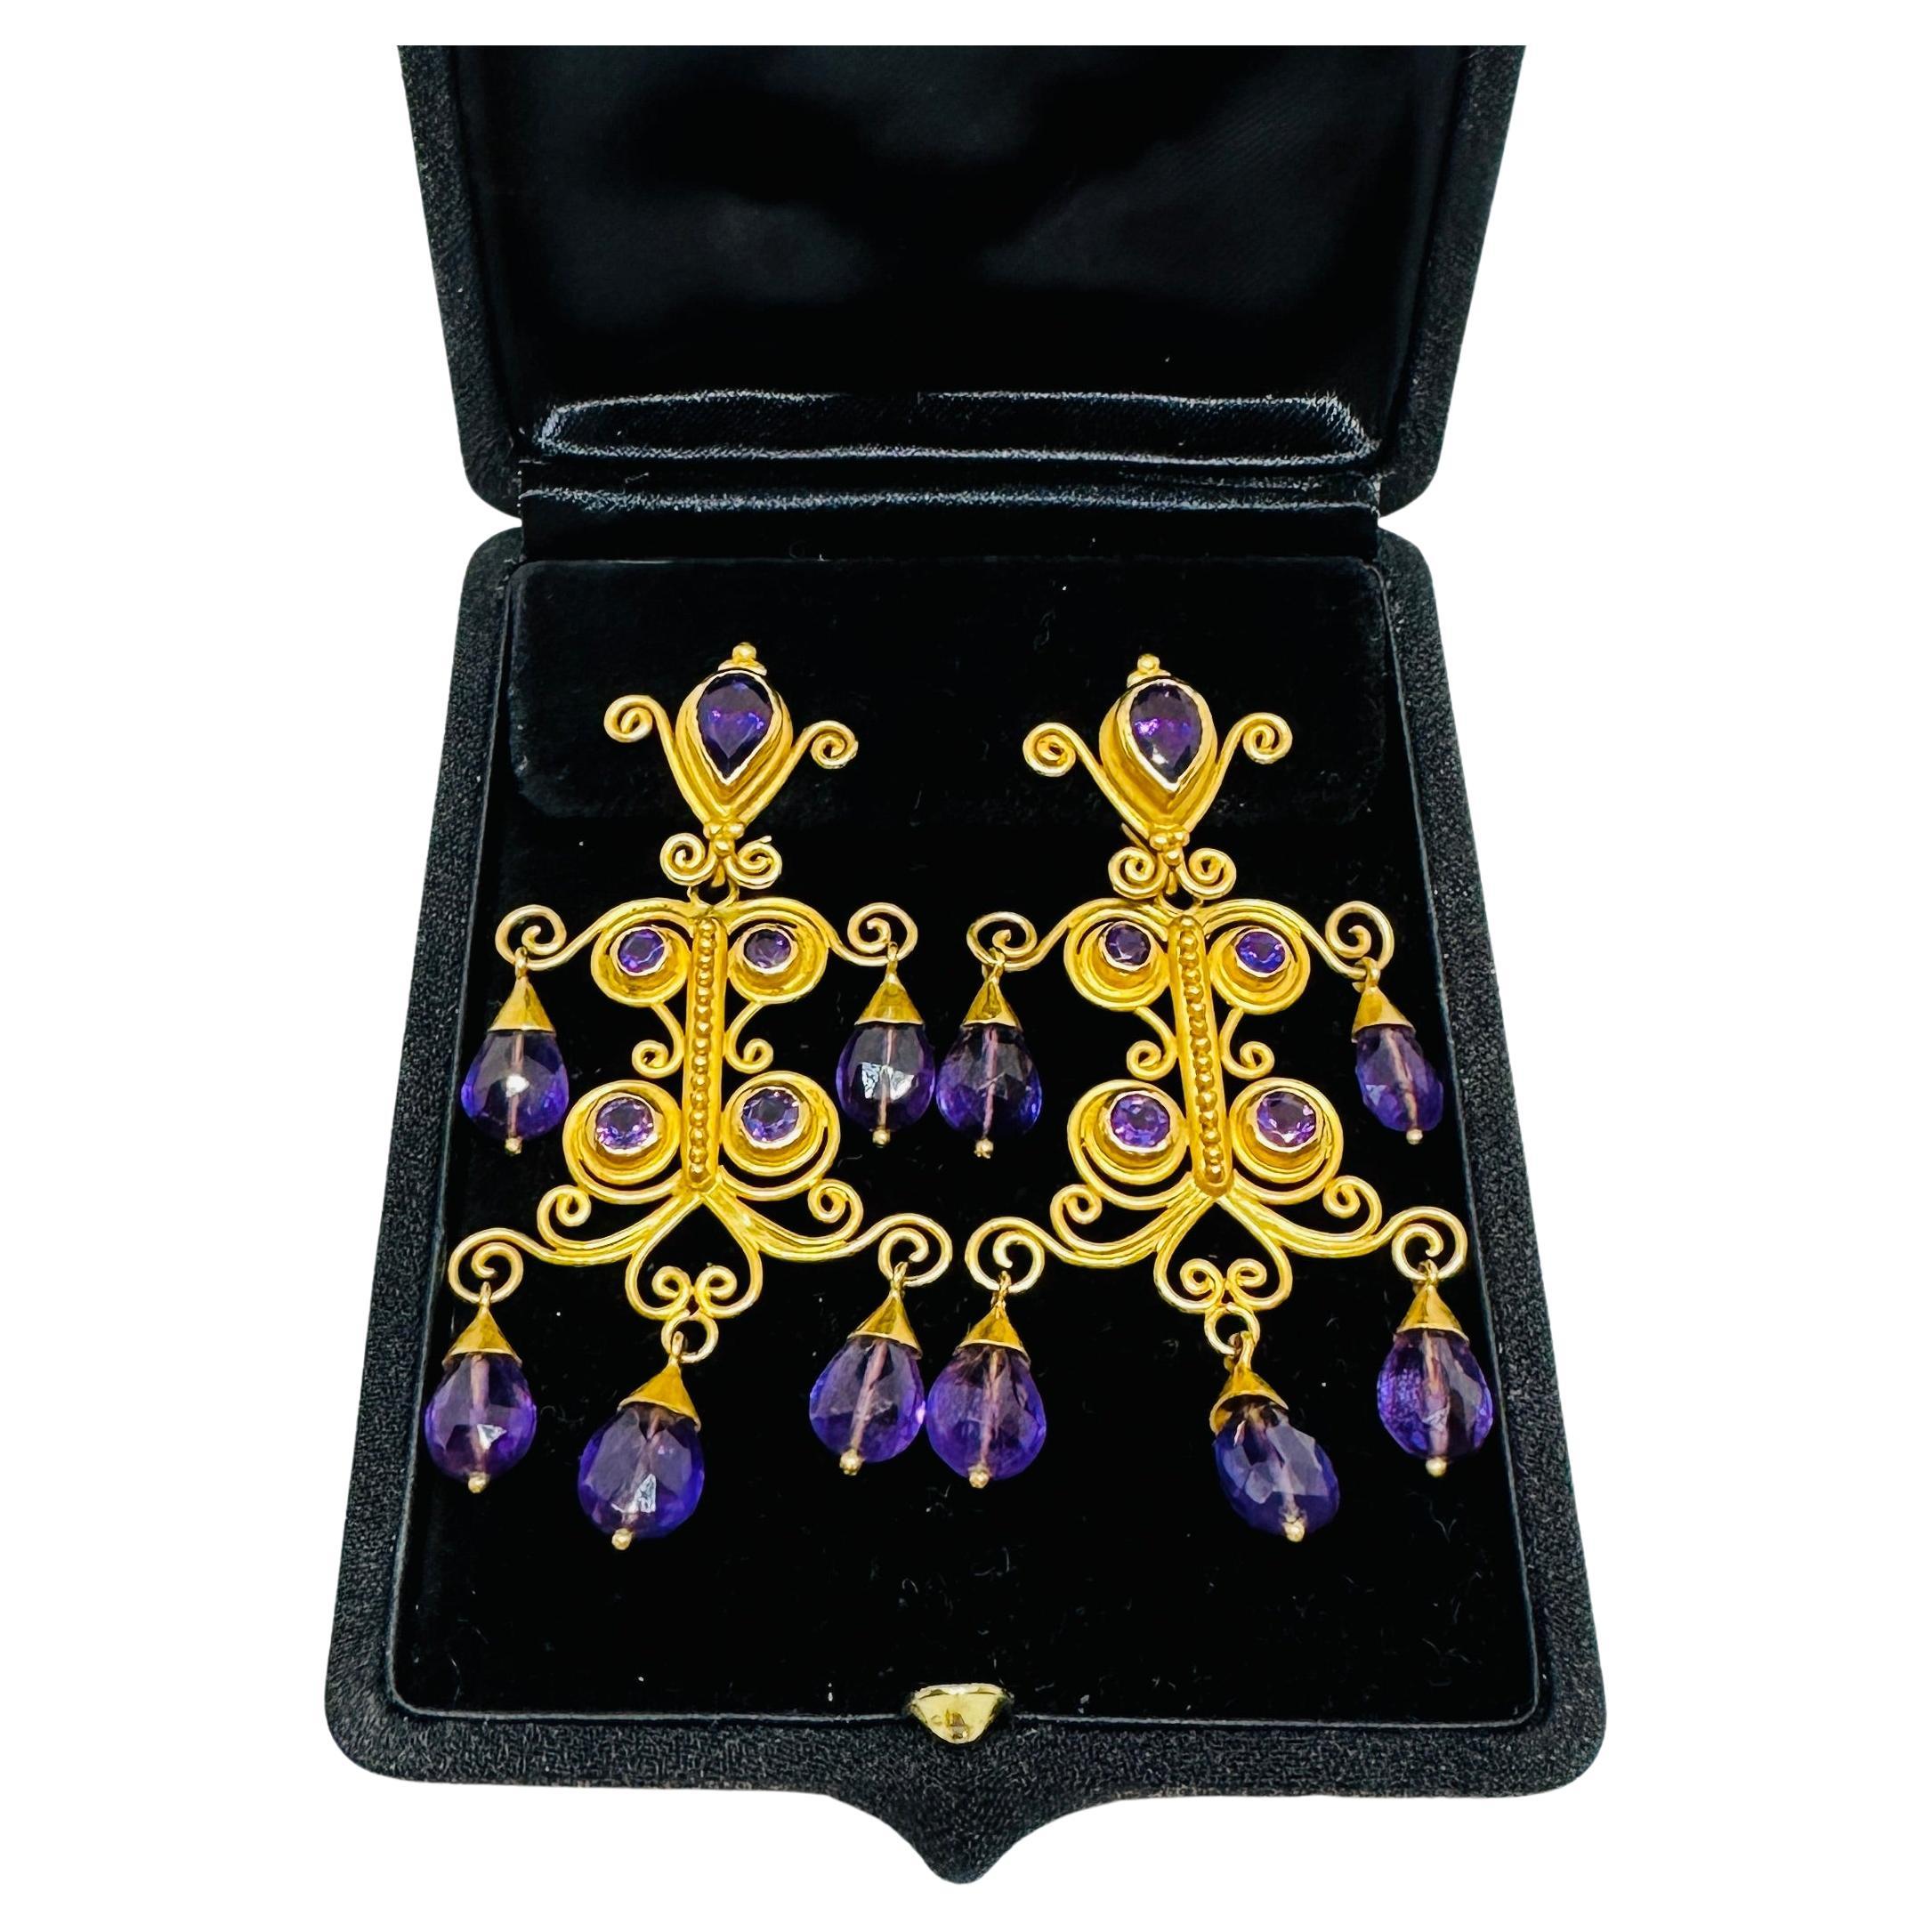 "Sonya" Earrings in High-Carat Gold and Amethysts by Carolyn Tyler For Sale